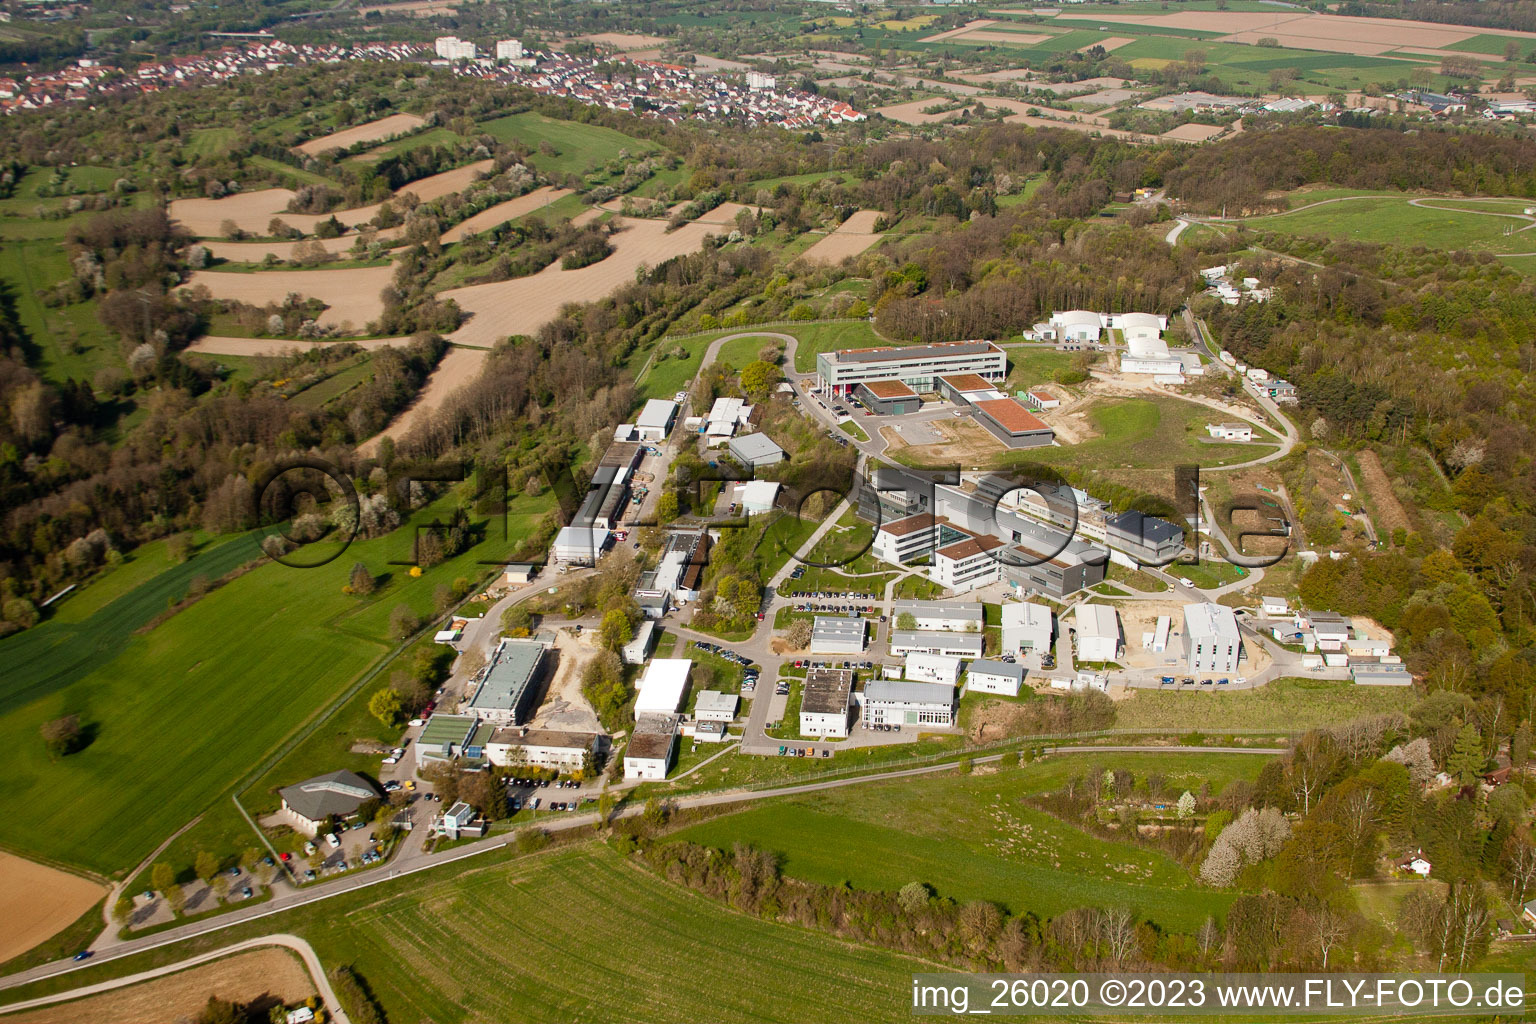 Fraunhofer Institute for Chemical Technology (ICT) in the district Berghausen in Pfinztal in the state Baden-Wuerttemberg, Germany from the plane